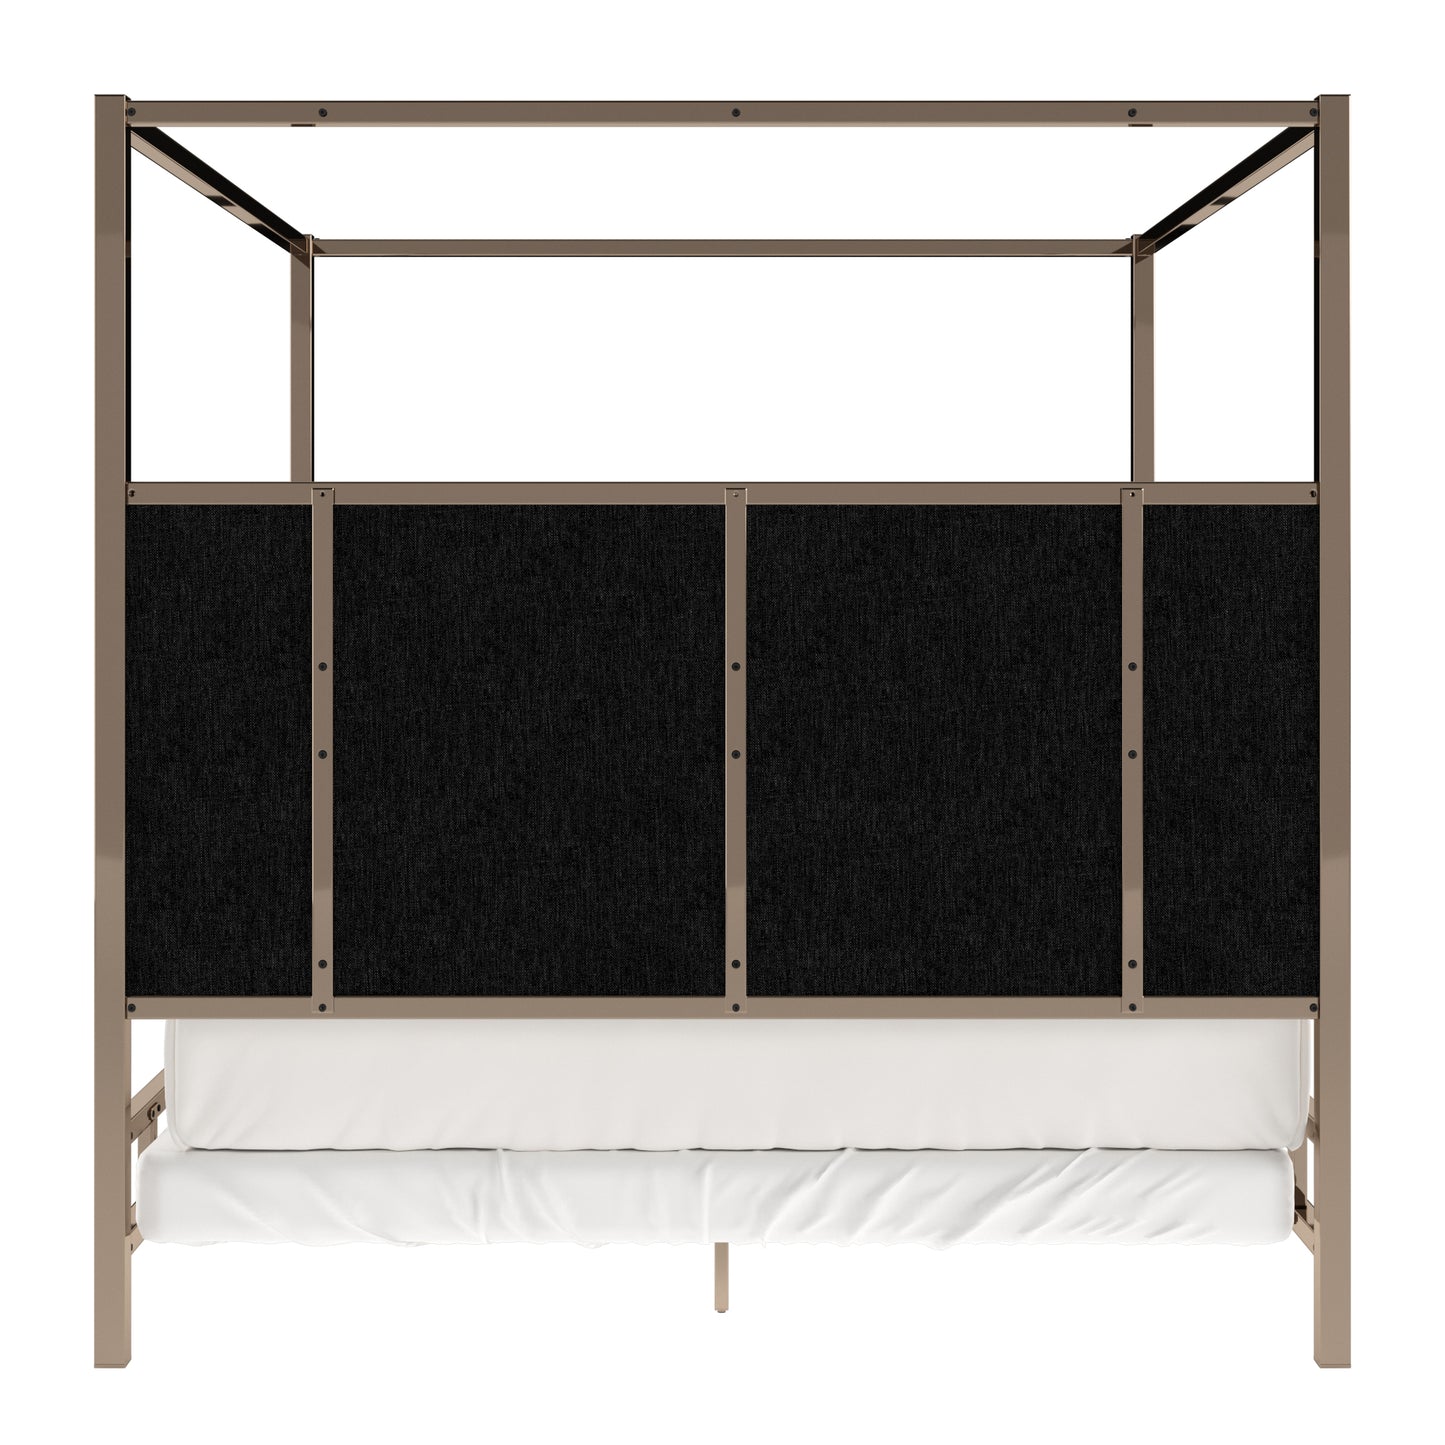 Metal Canopy Bed with Upholstered Headboard - Grey Linen, Champagne Gold Finish, King Size